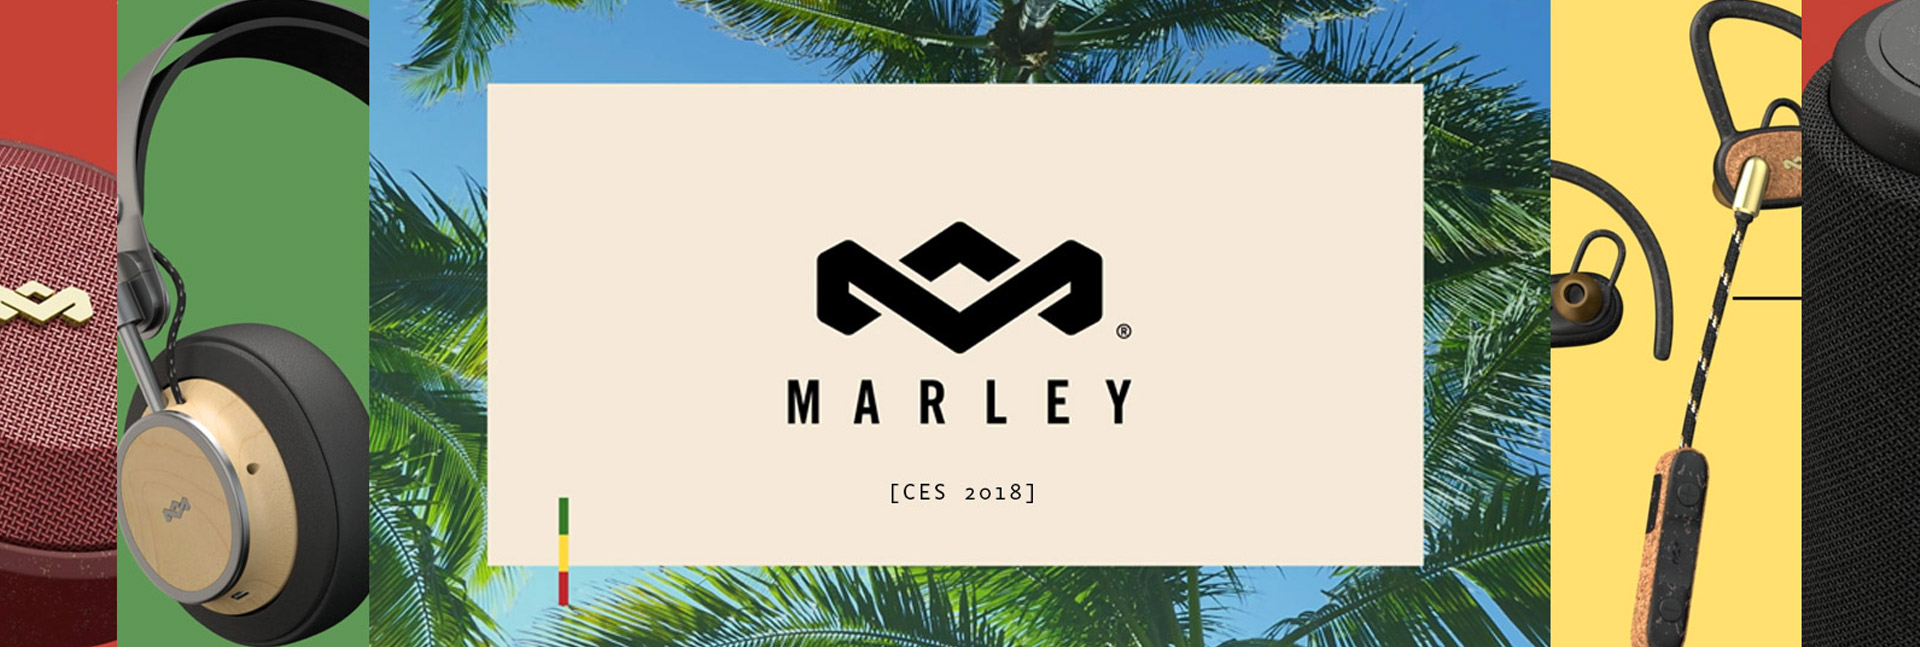  House of Marley -  2018 CES Visuals  |  View  